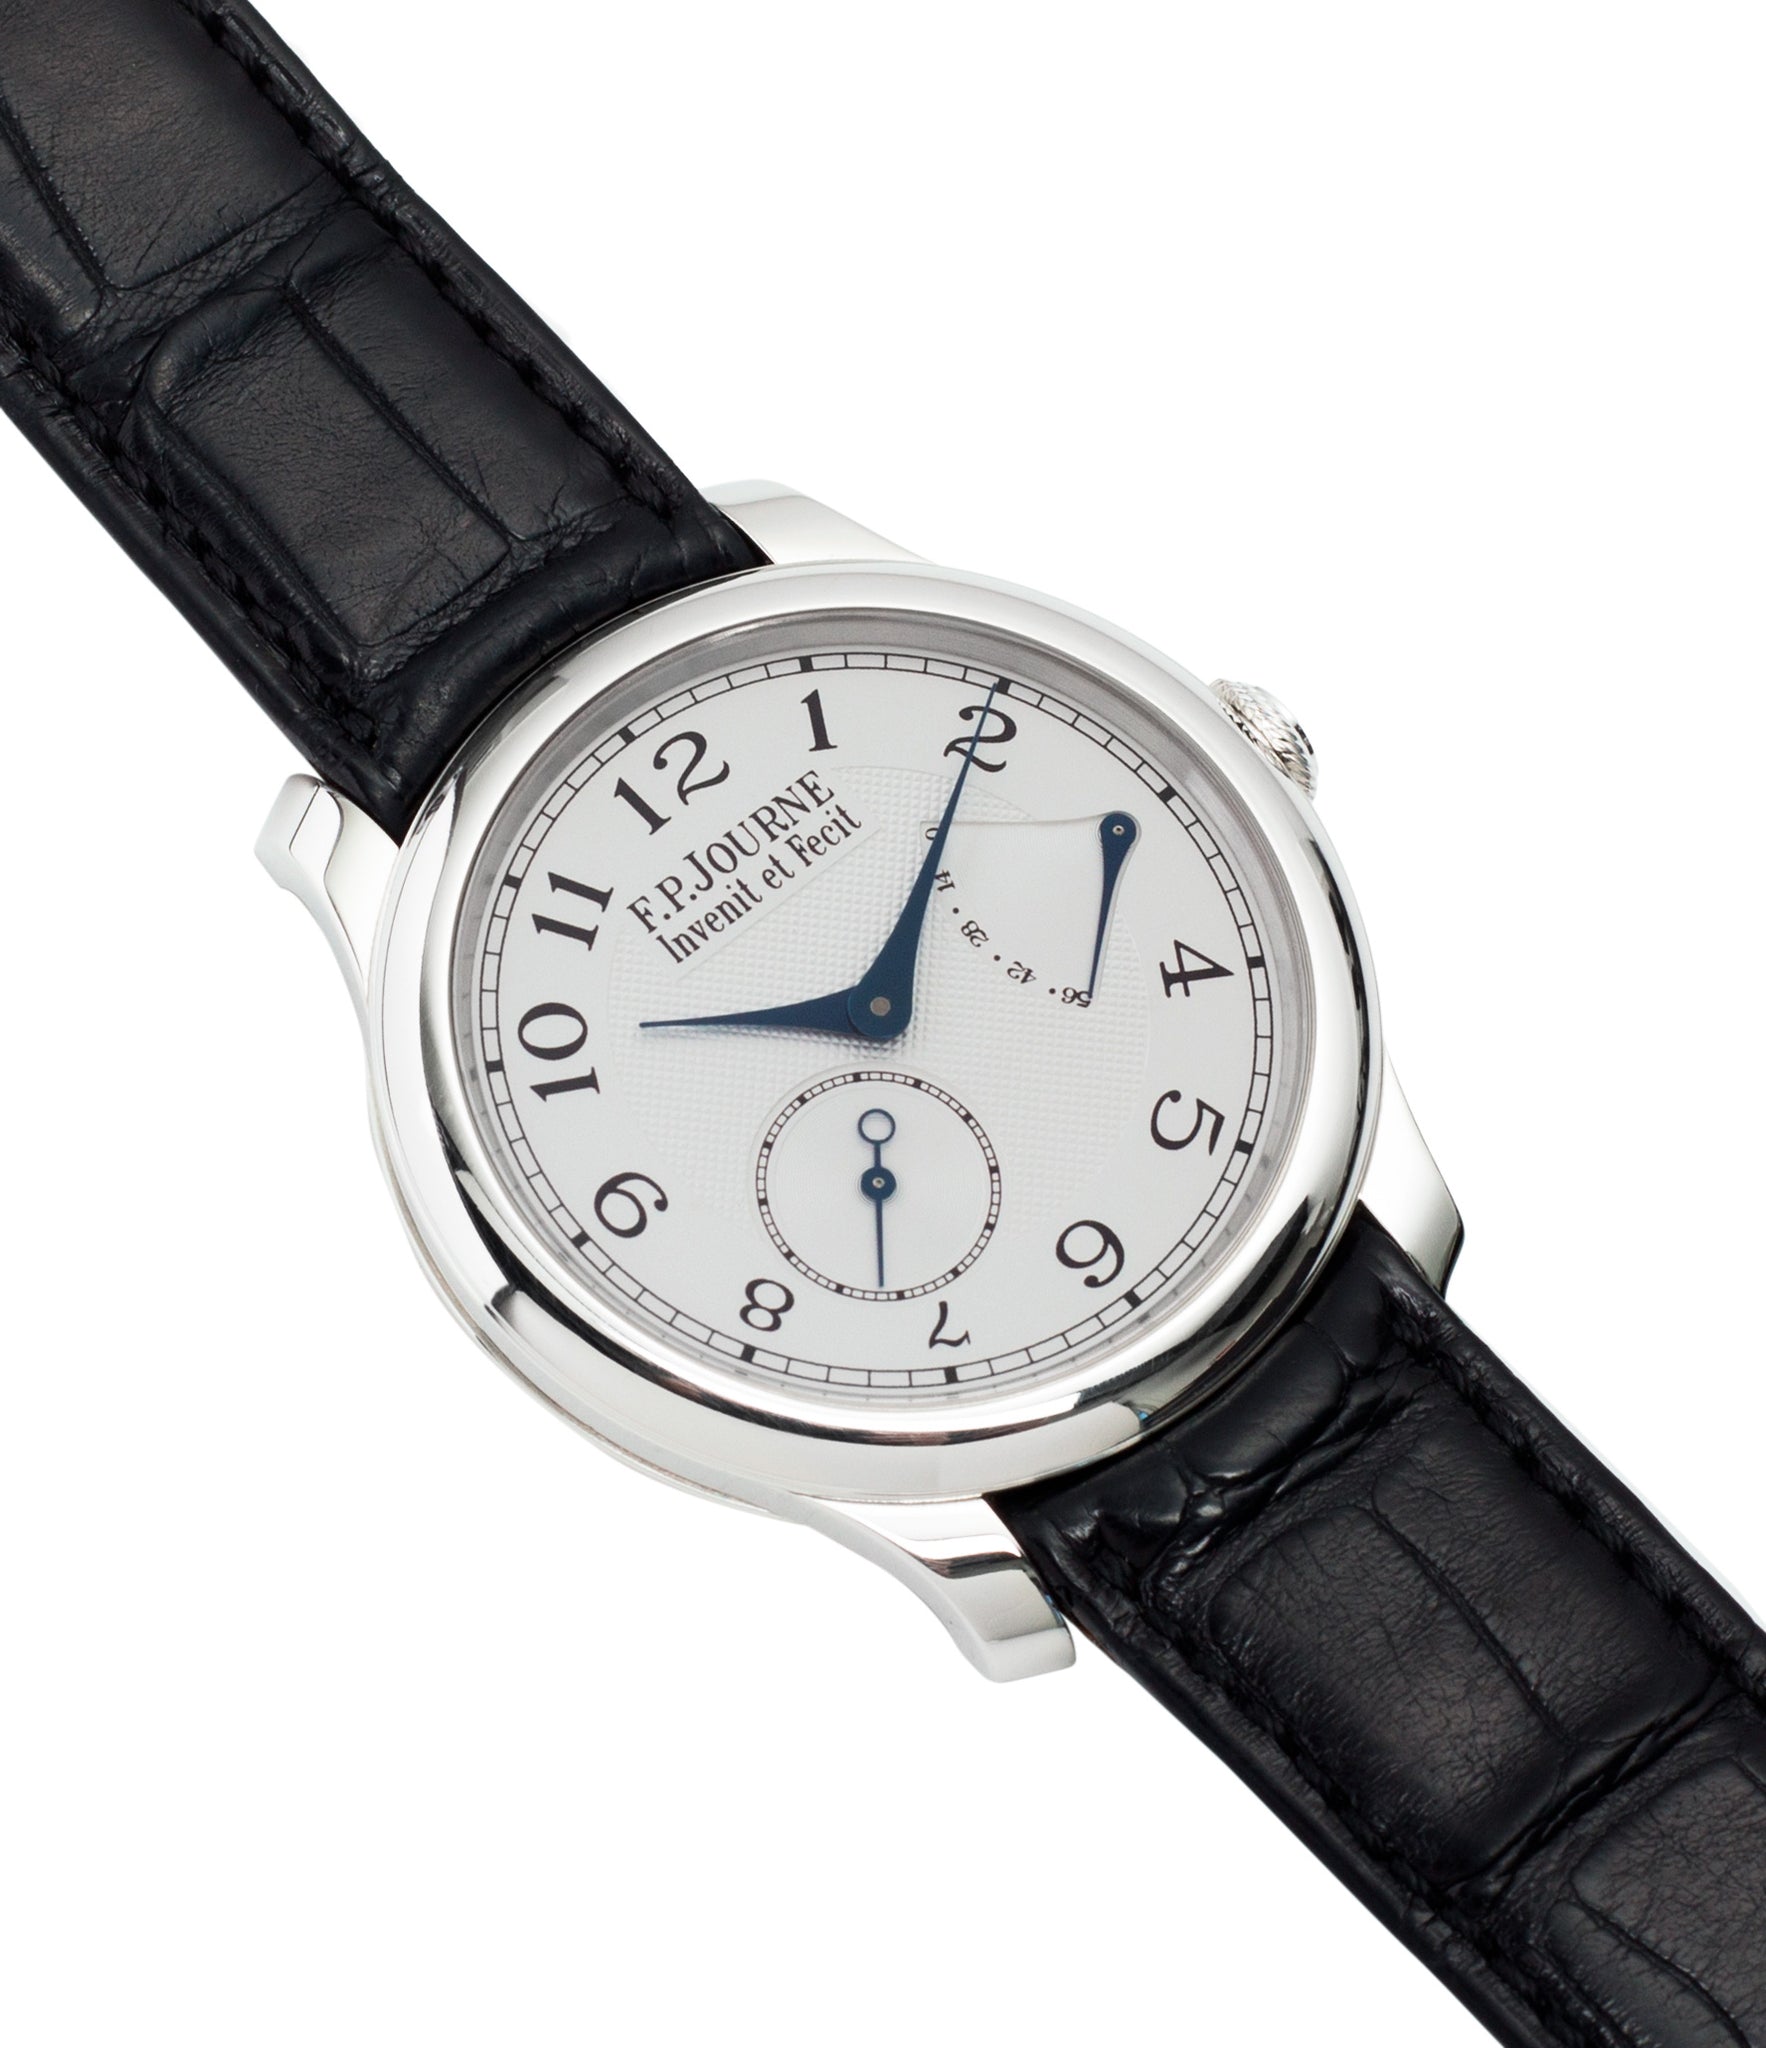 for sale preowned F. P. Journe Chronometre Souverain platinum watch silver dial online at A Collected Man London specialist retailer of independent watchmakers in UK